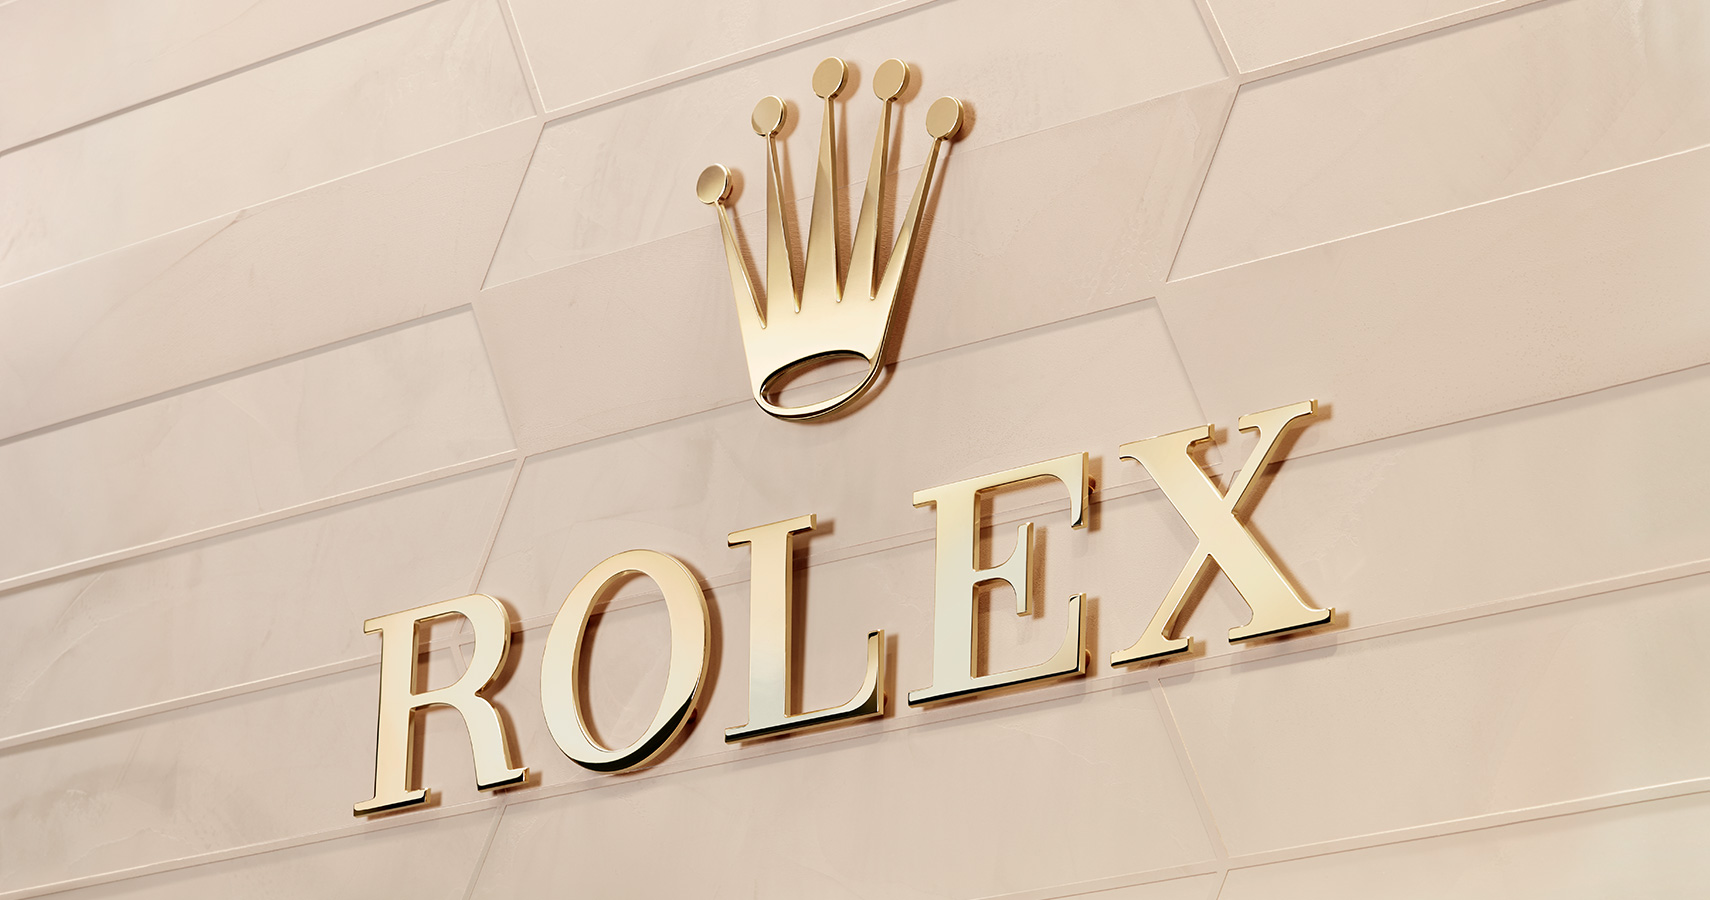 La Mine dOr, as an Official Rolex Retailer, we are the only retailers allowed to sell Rolex watches.